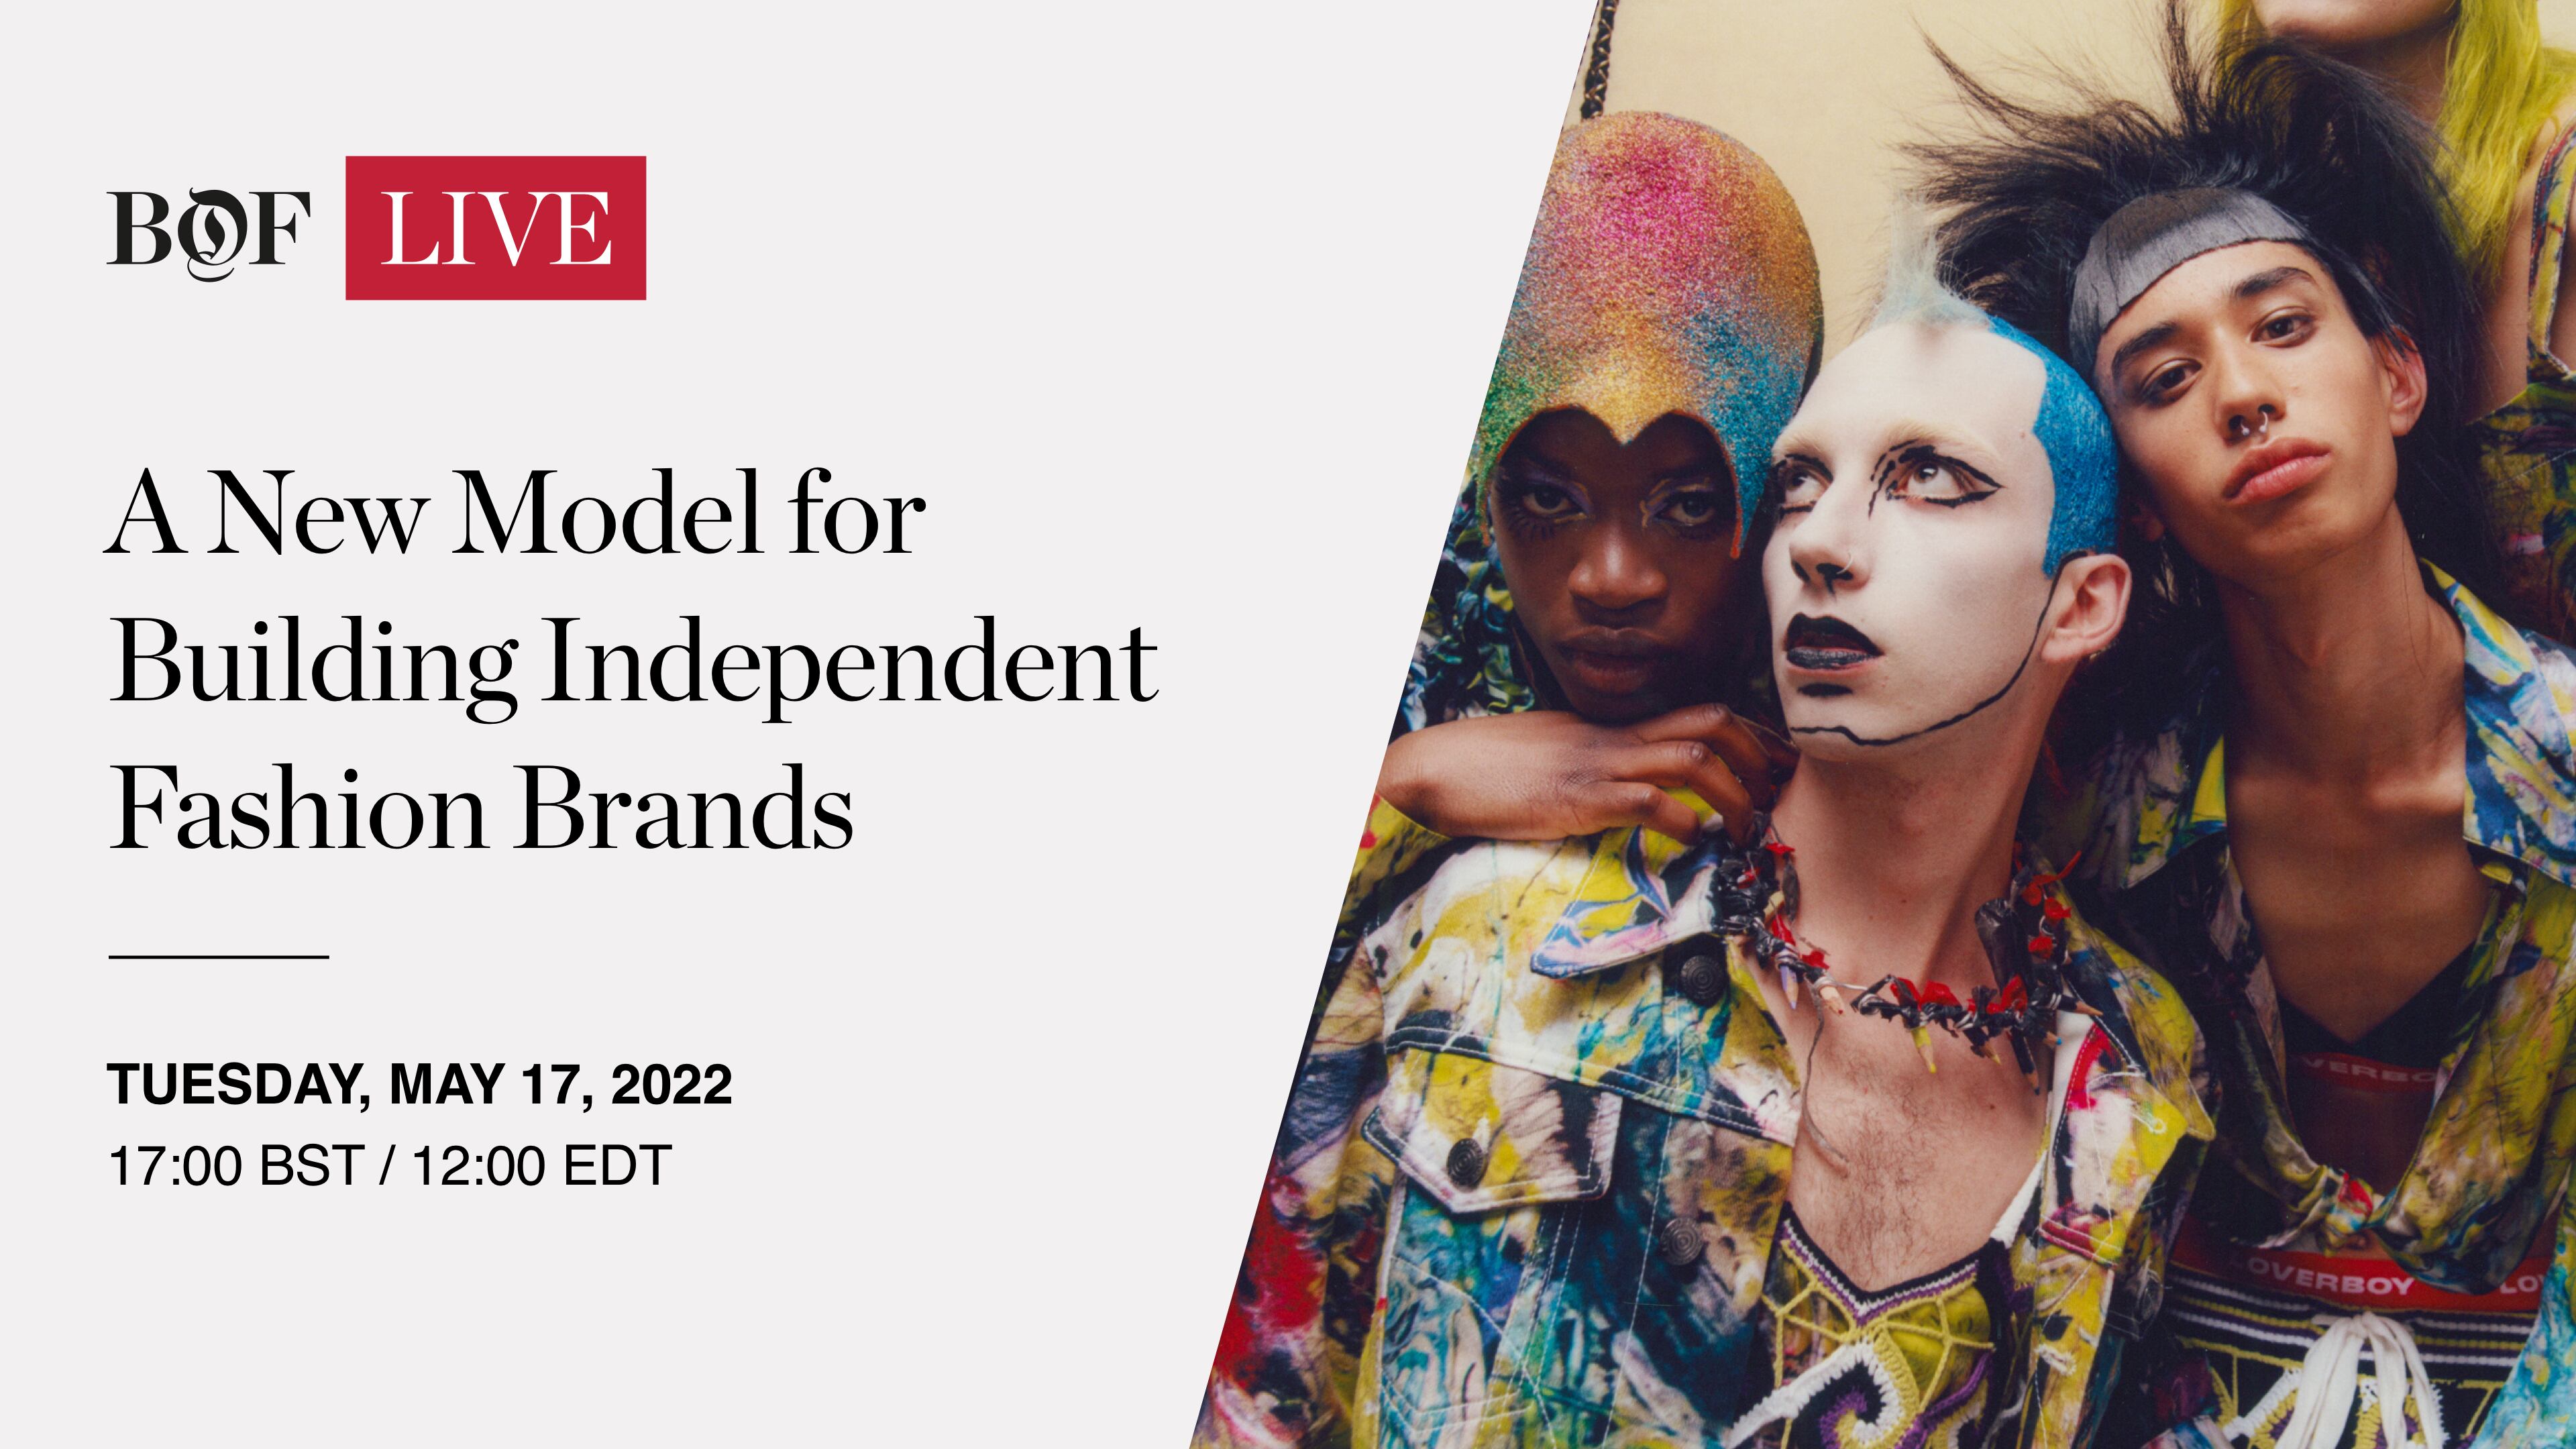 BoF LIVE: A New Model for Building Independent Fashion Brands | BoF